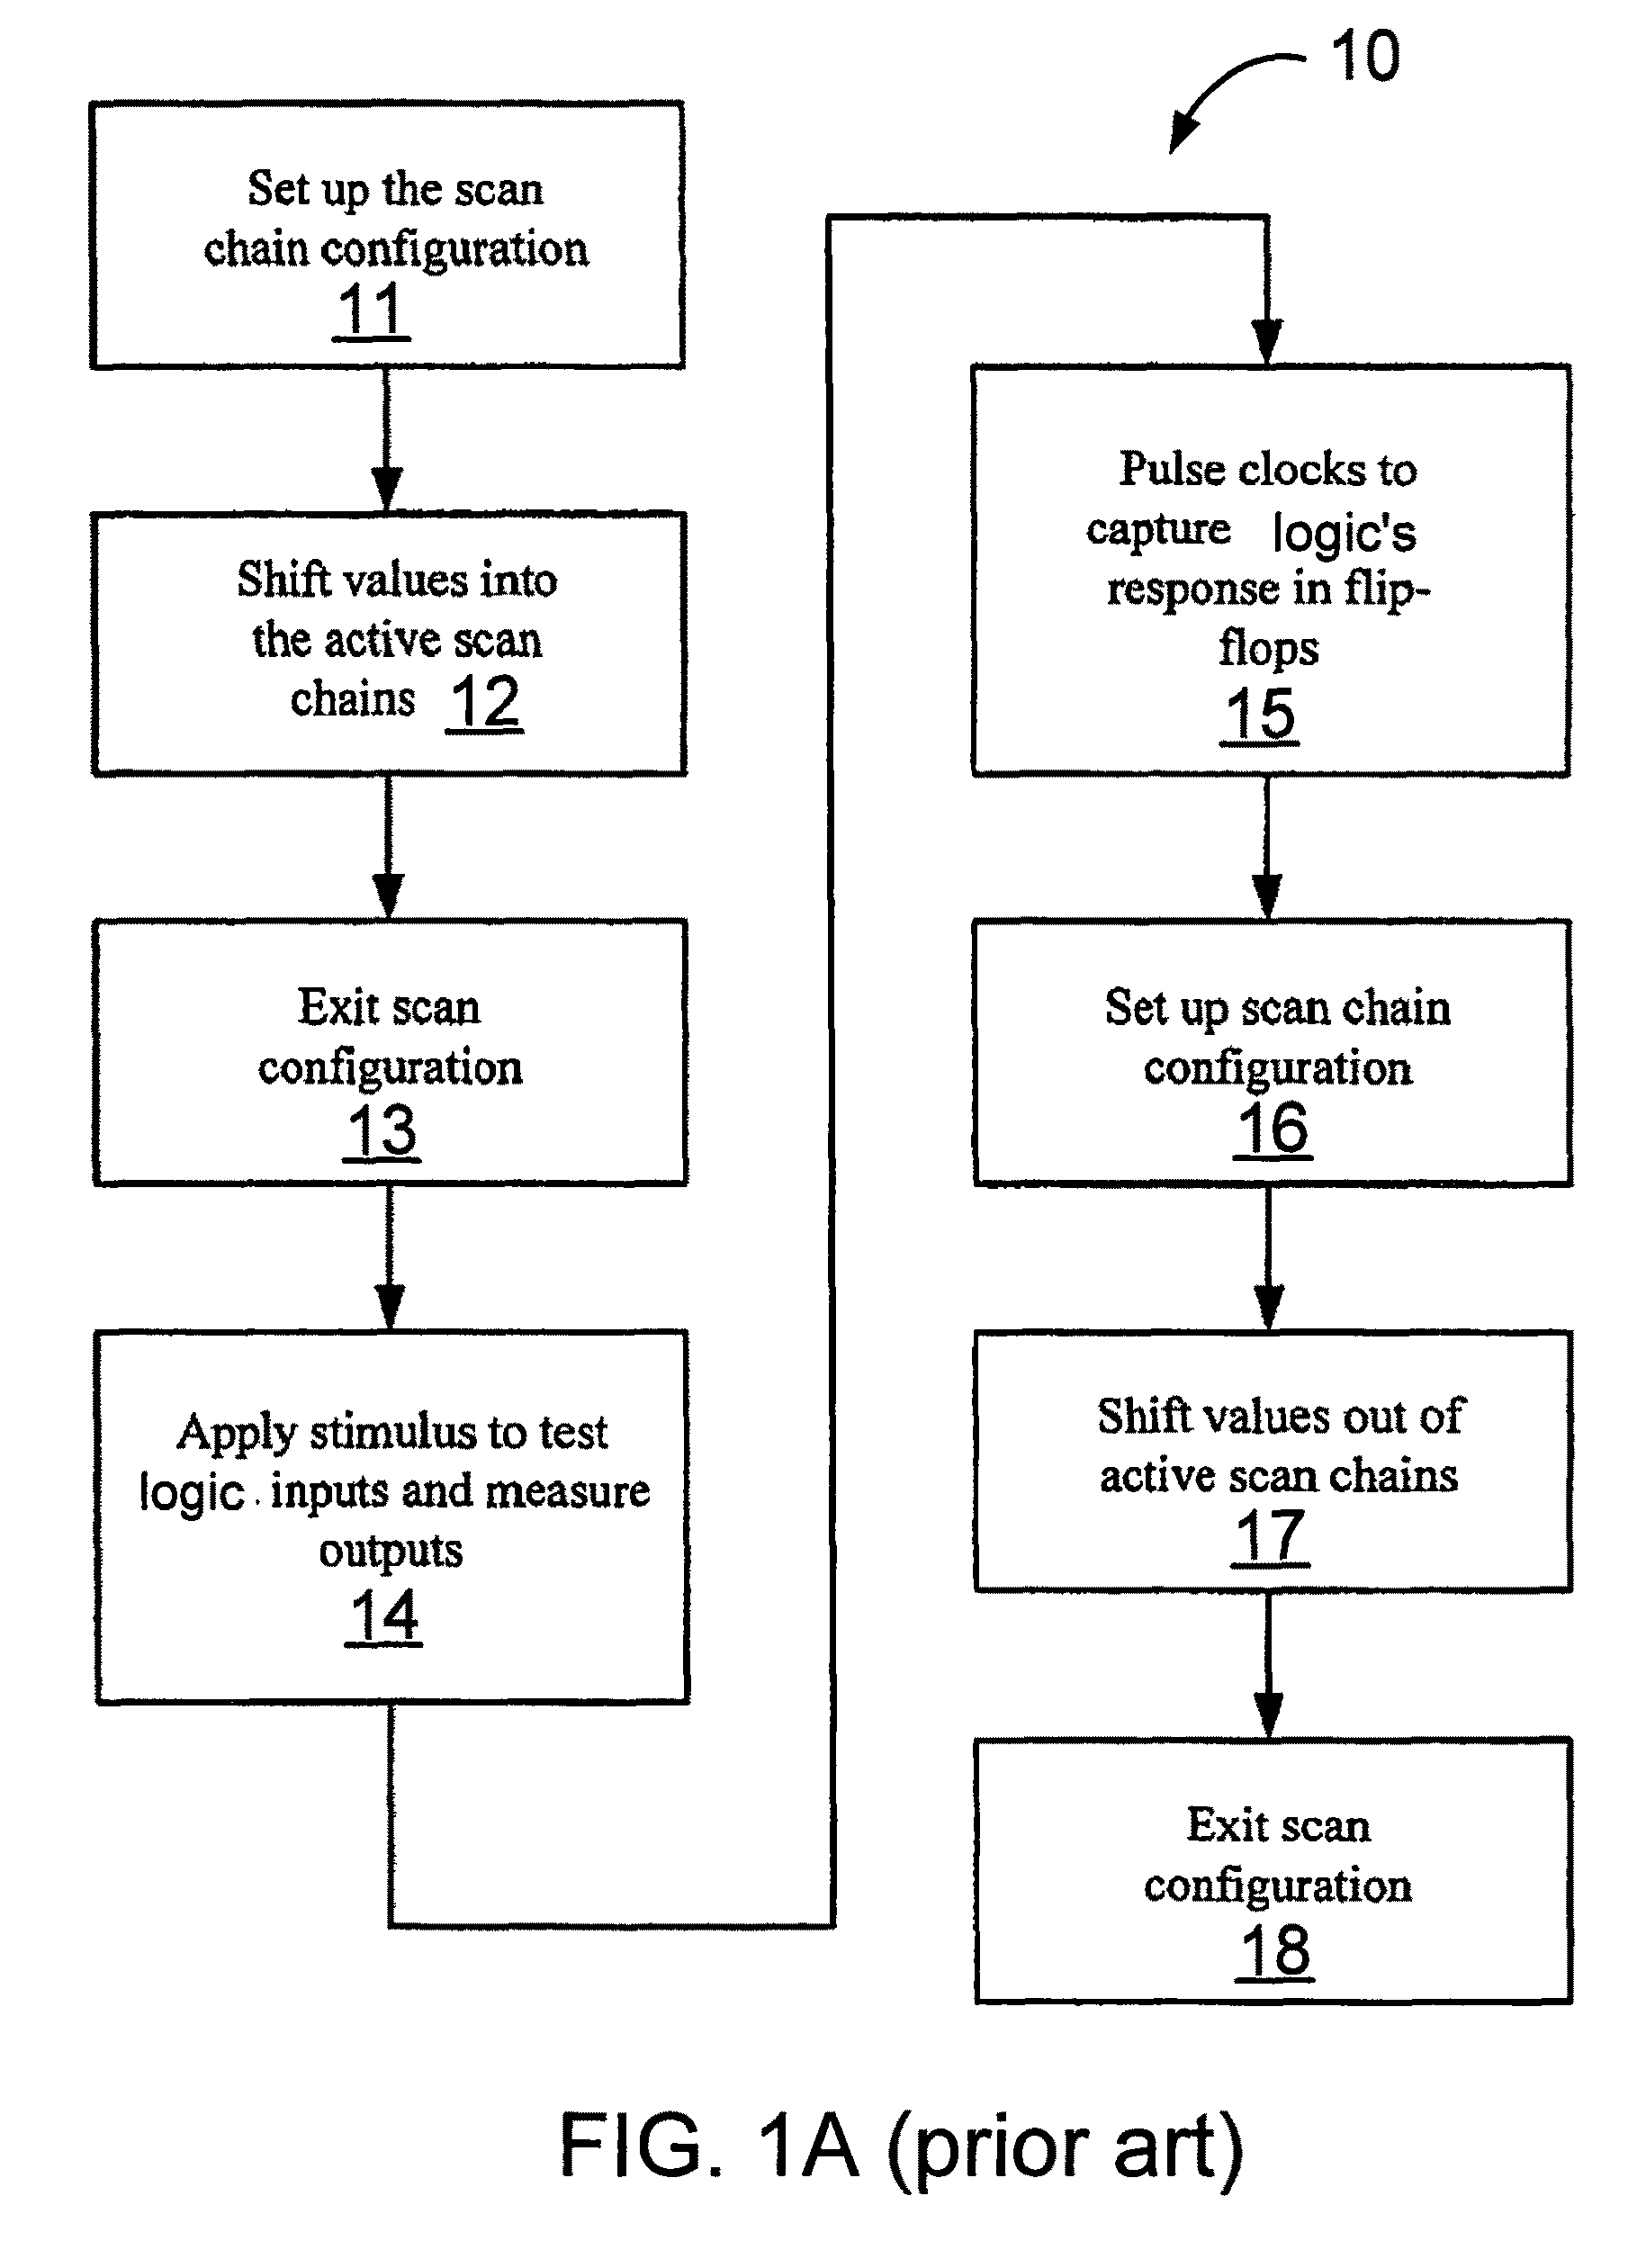 Pipeline of additional storage elements to shift input/output data of combinational scan compression circuit